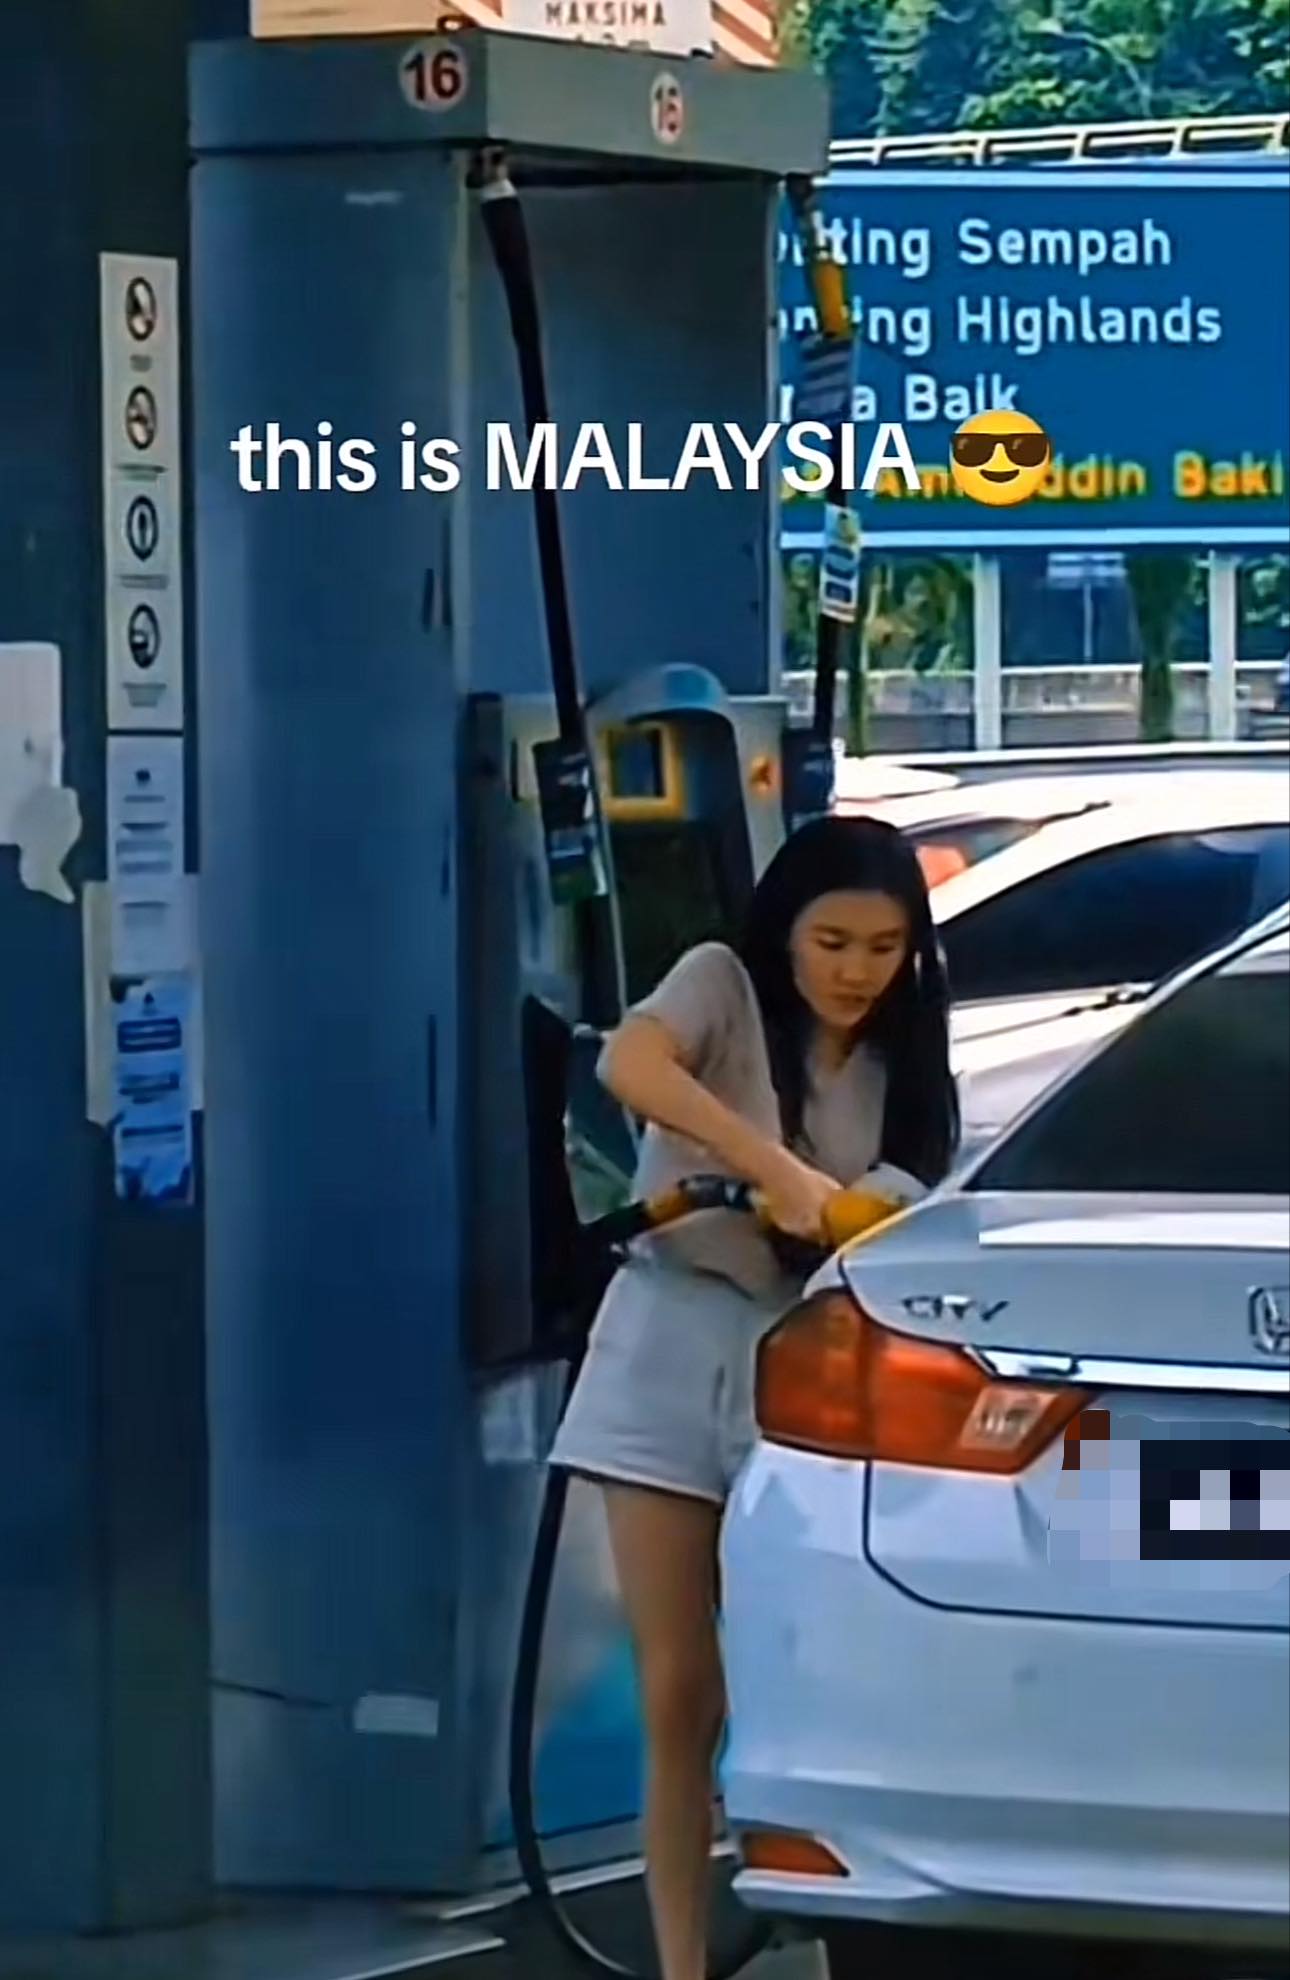 M'sian man gives remainder of his petrol to another driver, gets praised for his generosity